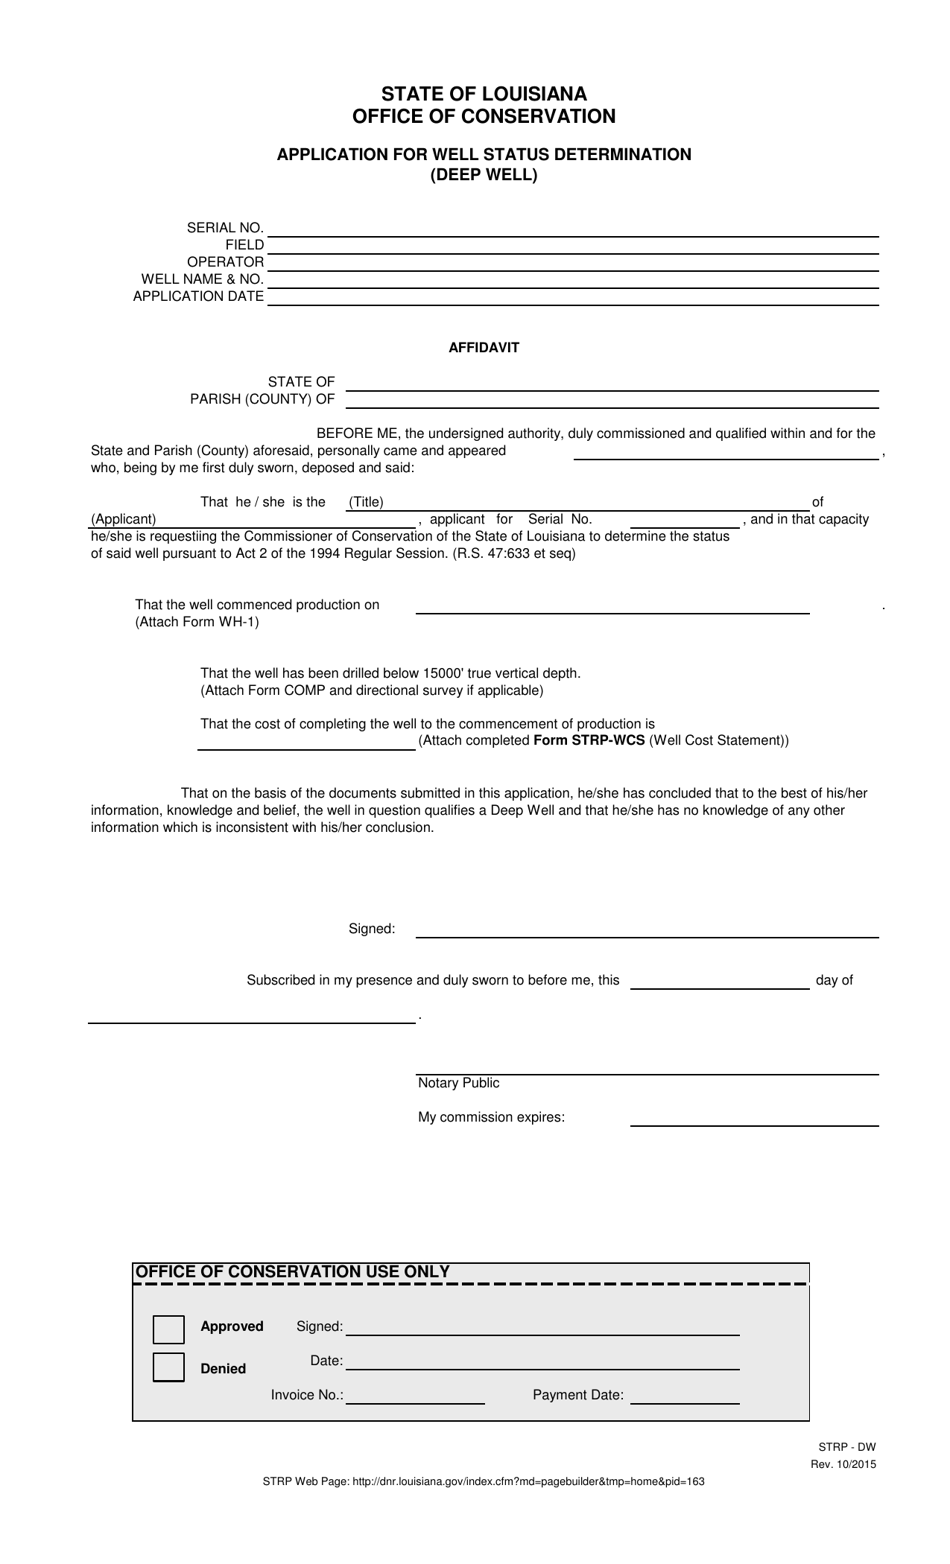 Form STRP-DW Application for Well Status Determination (Deep Well) - Louisiana, Page 1